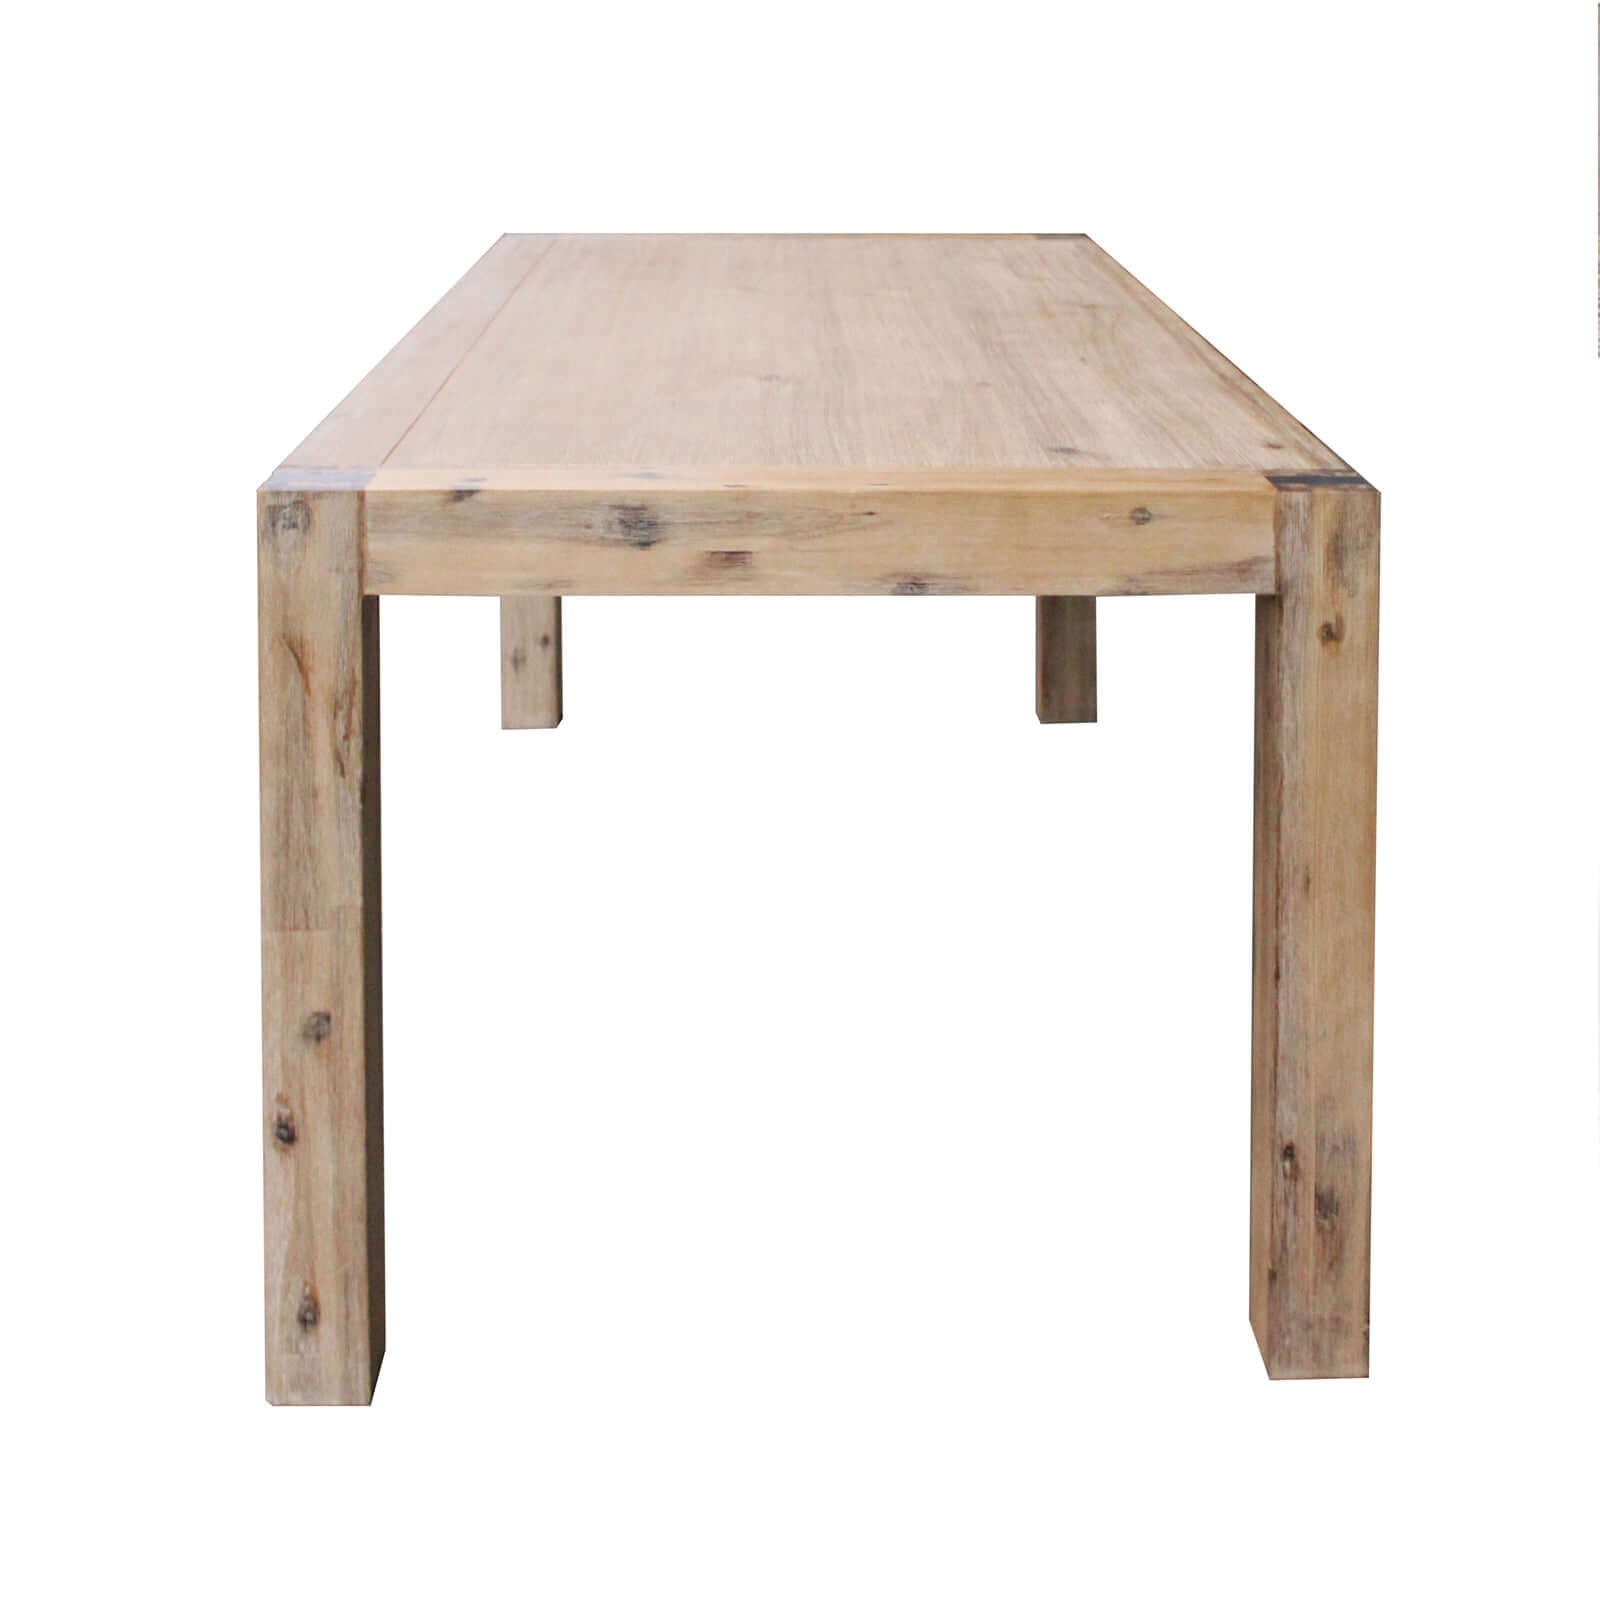 Dining Table 180cm Medium Size with Solid Acacia Wooden Base in Oak Colour-Upinteriors